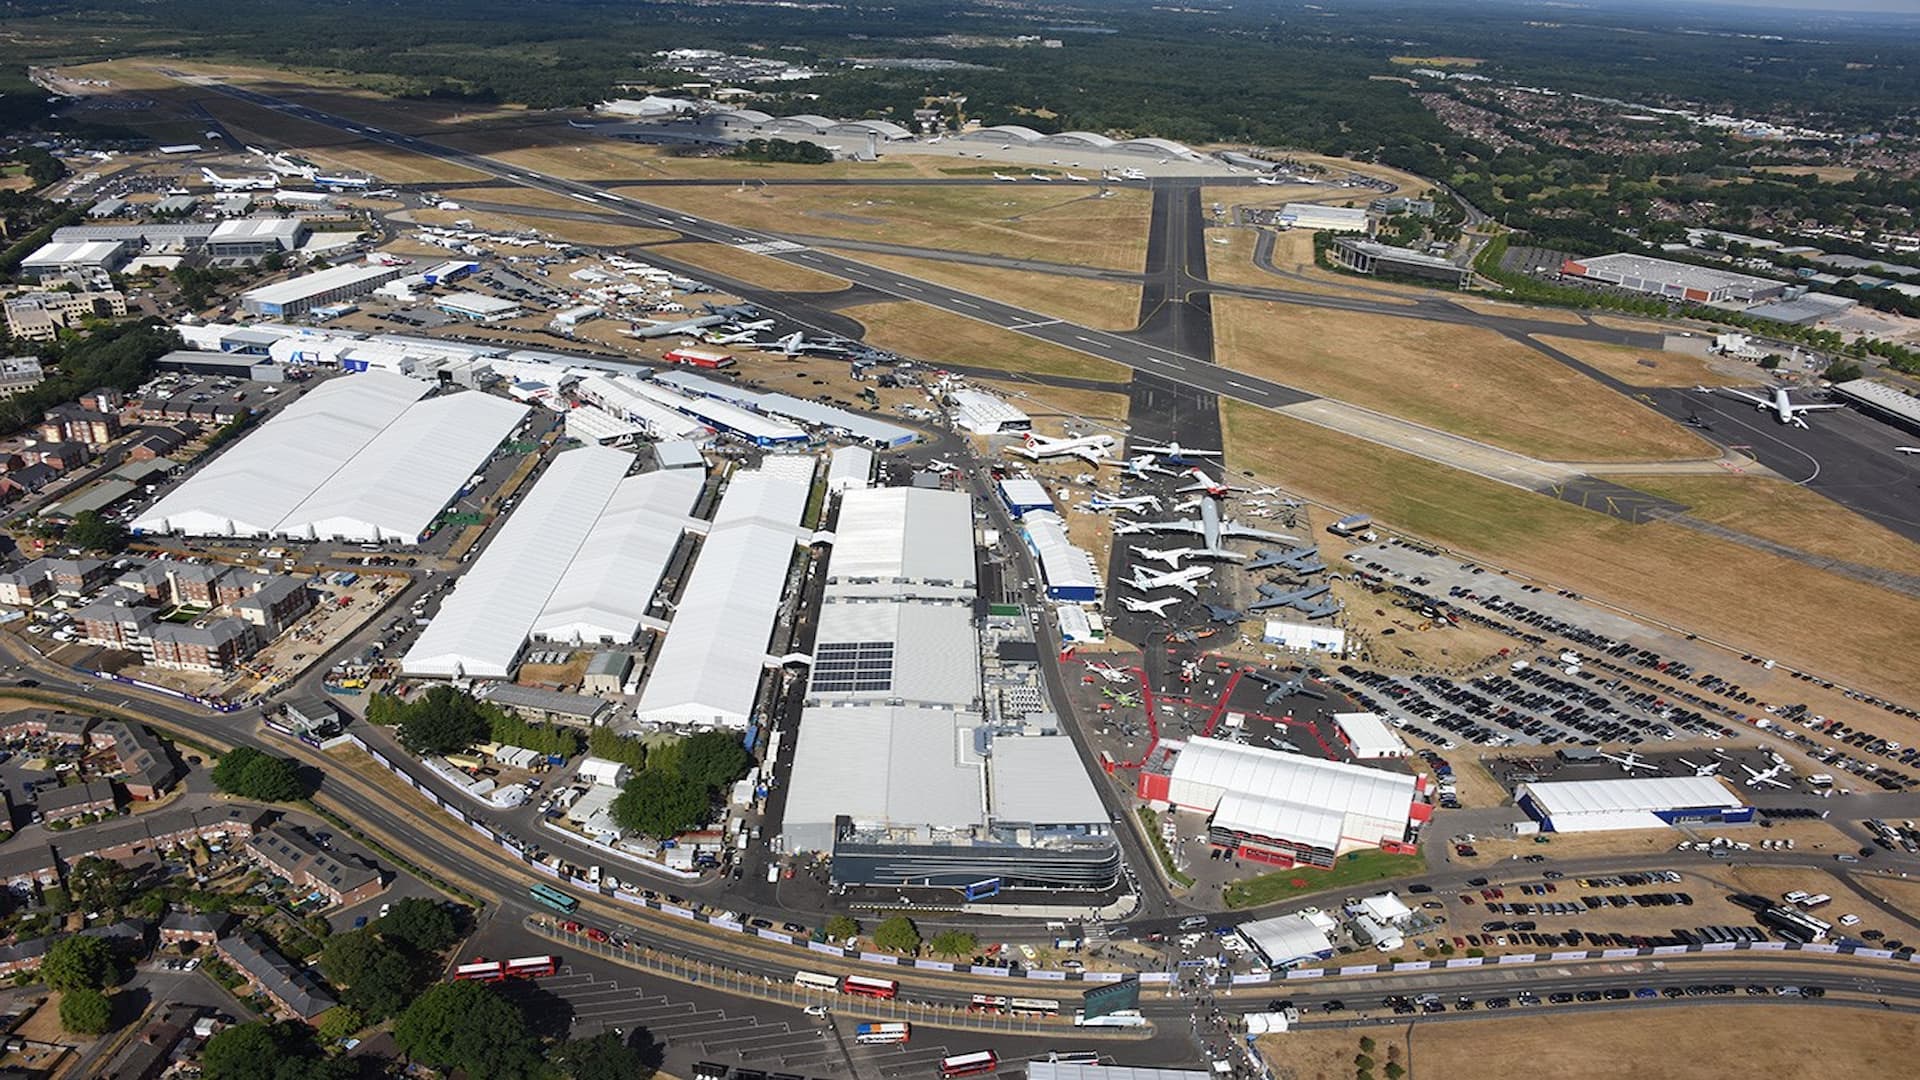 ASI - THE ITALIAN SPACE IN THE FOREGROUND AT THE FARNBOROUGH INTERNATIONAL AIRSHOW